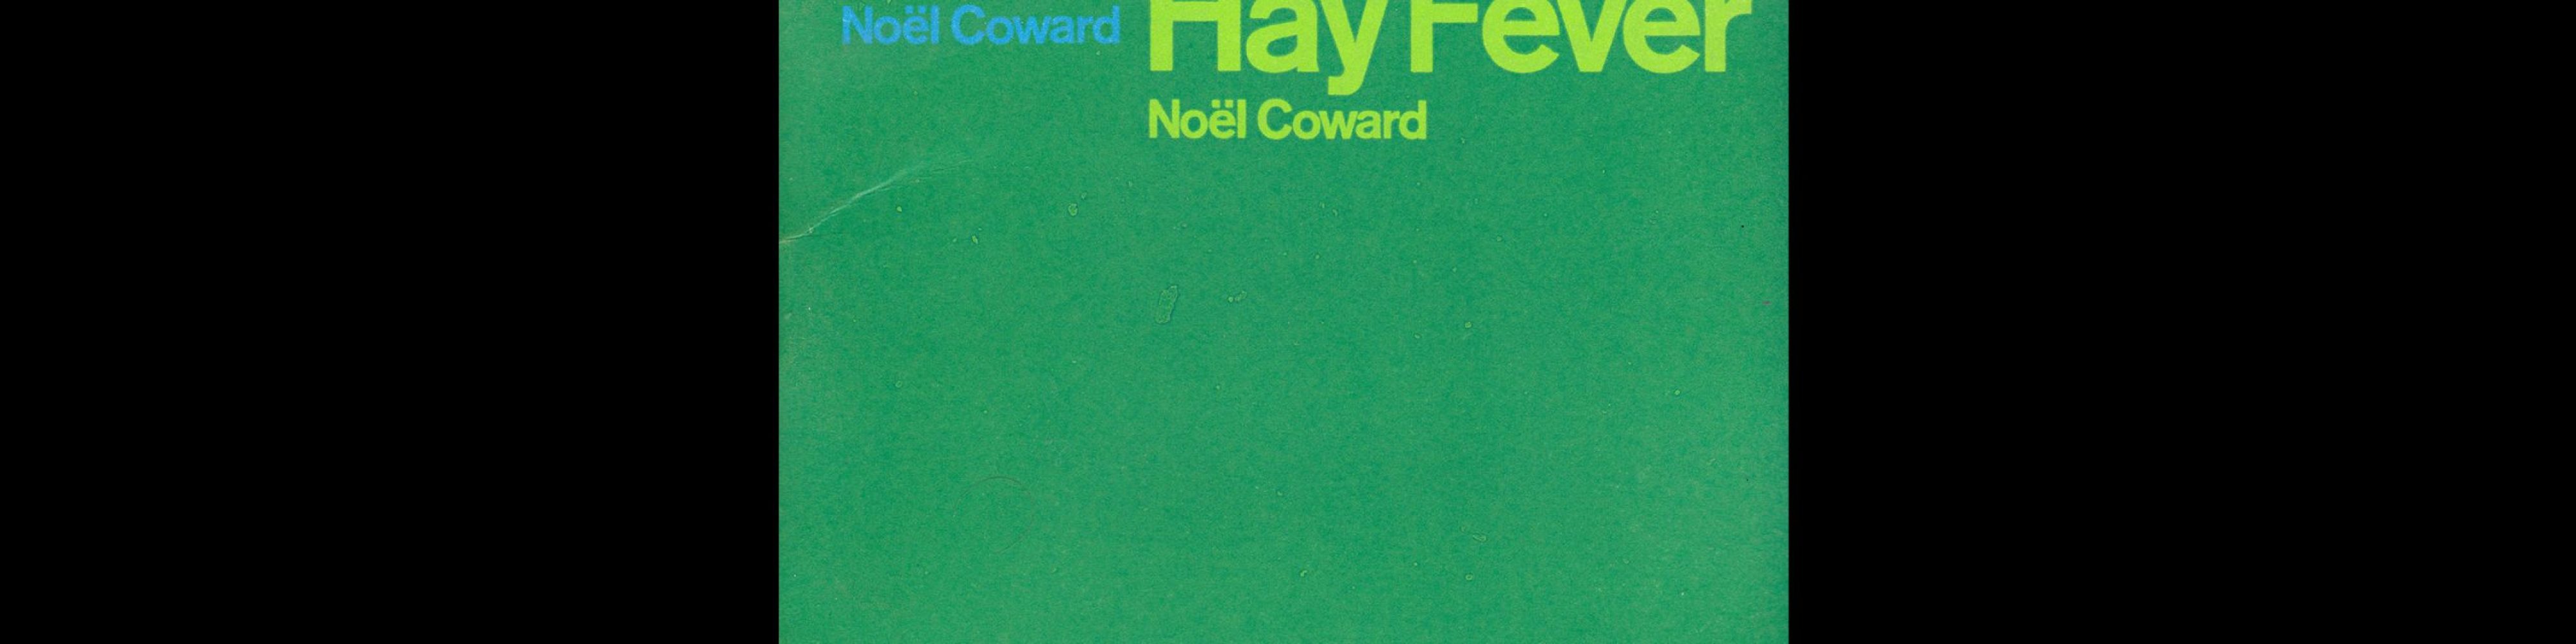 Hay Fever, The National Theatre, London, 1964. Designed by Ken Briggs